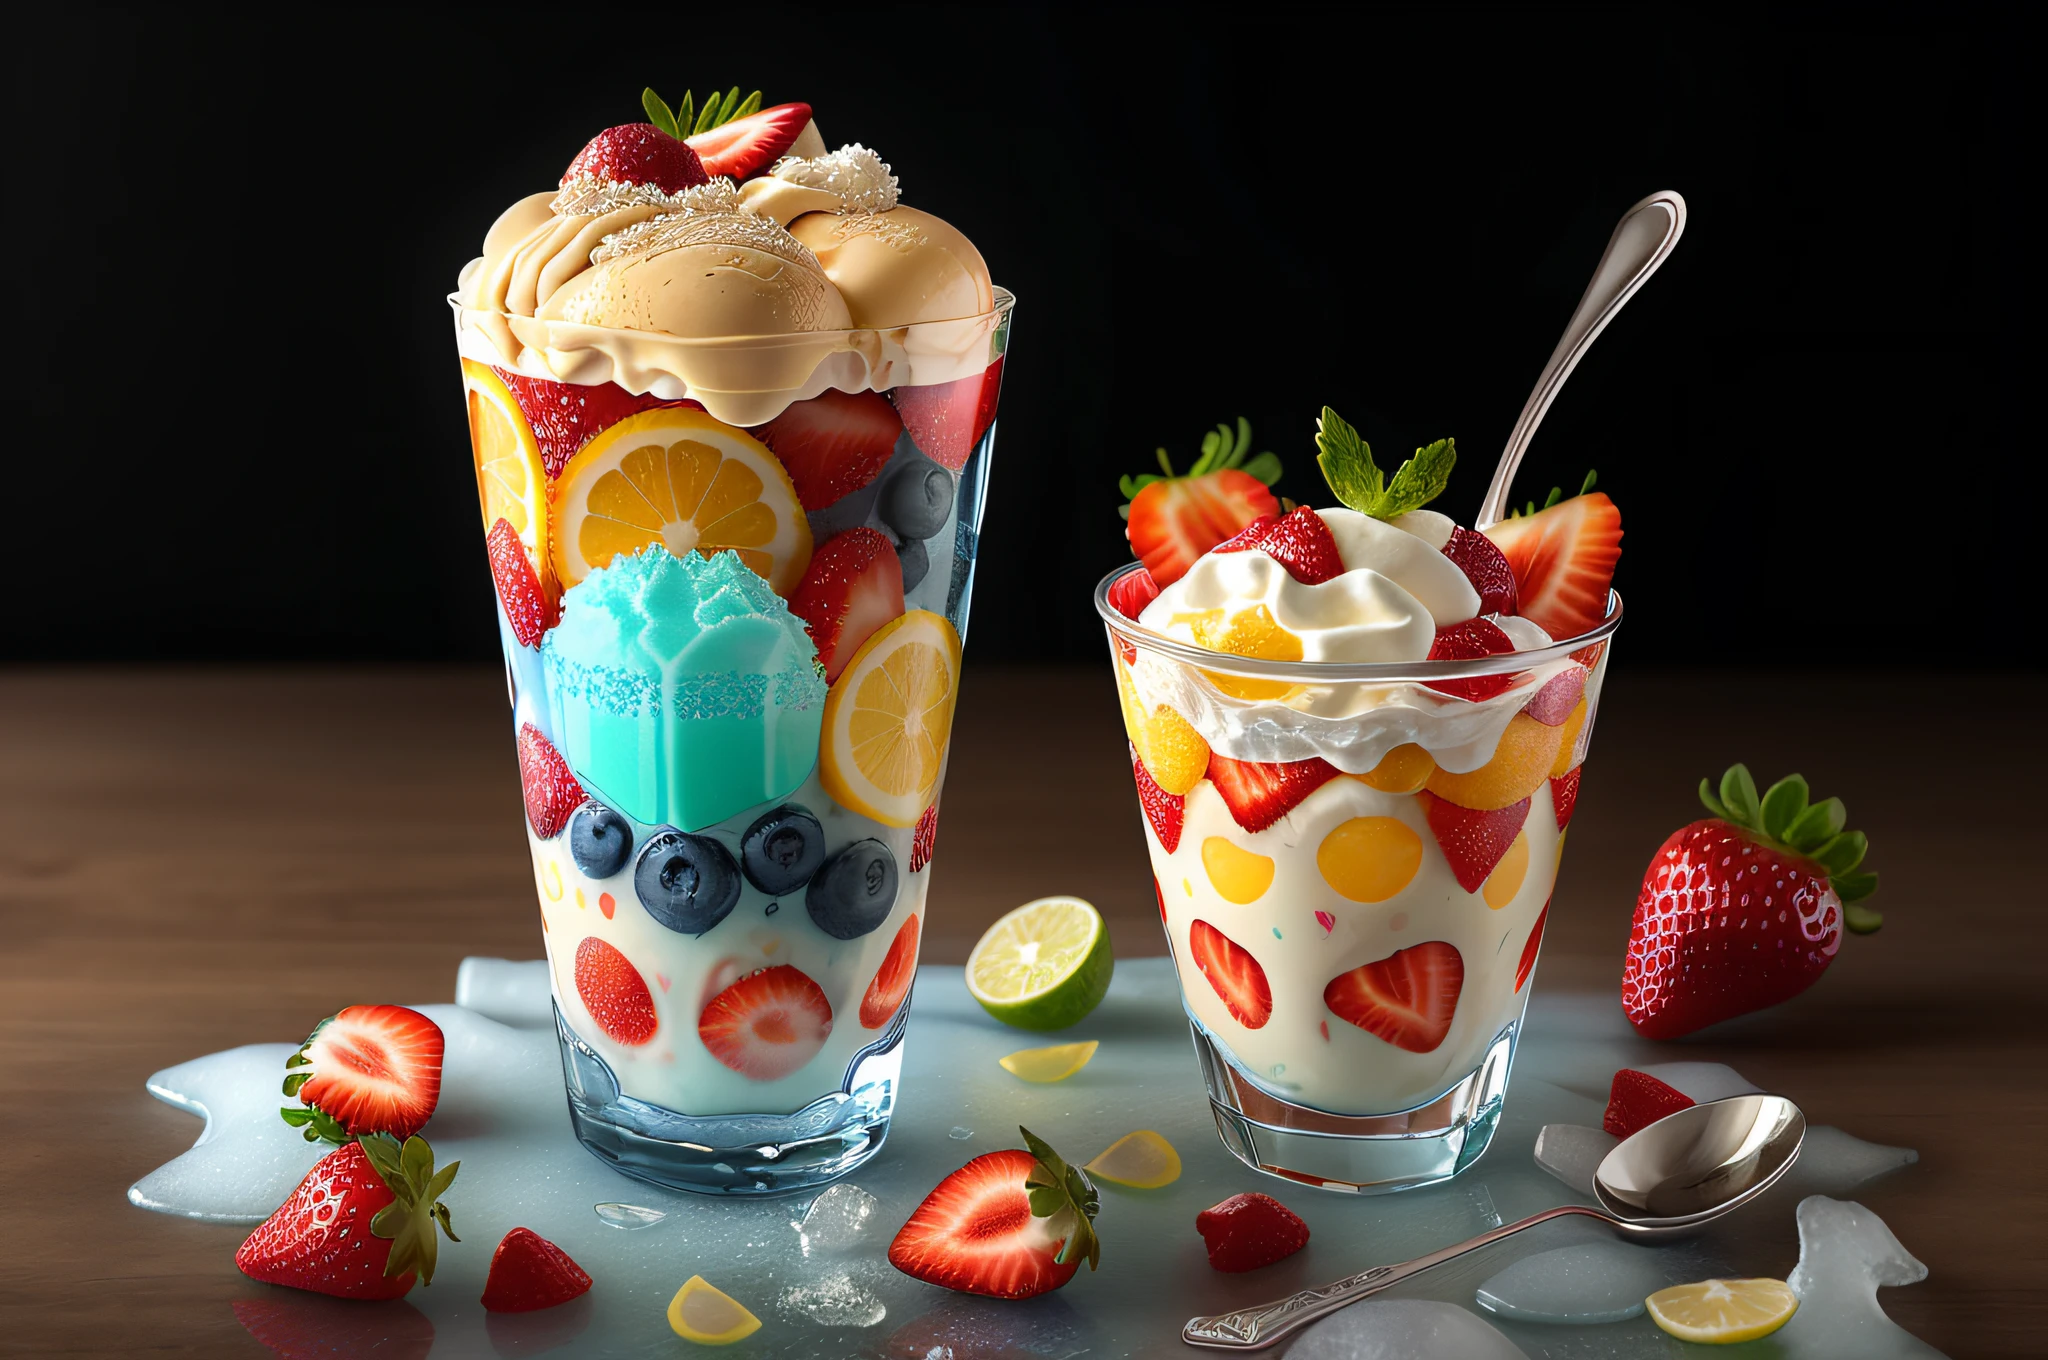 (Masterpiece), (intriciate detail), (Photorealistic:1.3), no human, mixed fruit Parfait, A mixture of fruits and ice cream with shaved ice, in Angled crystal glasses, Topped with strawberries and cream, universe, Marine Blue Theme, dramatic lighting, Spoon, pieces of ice, fruits,